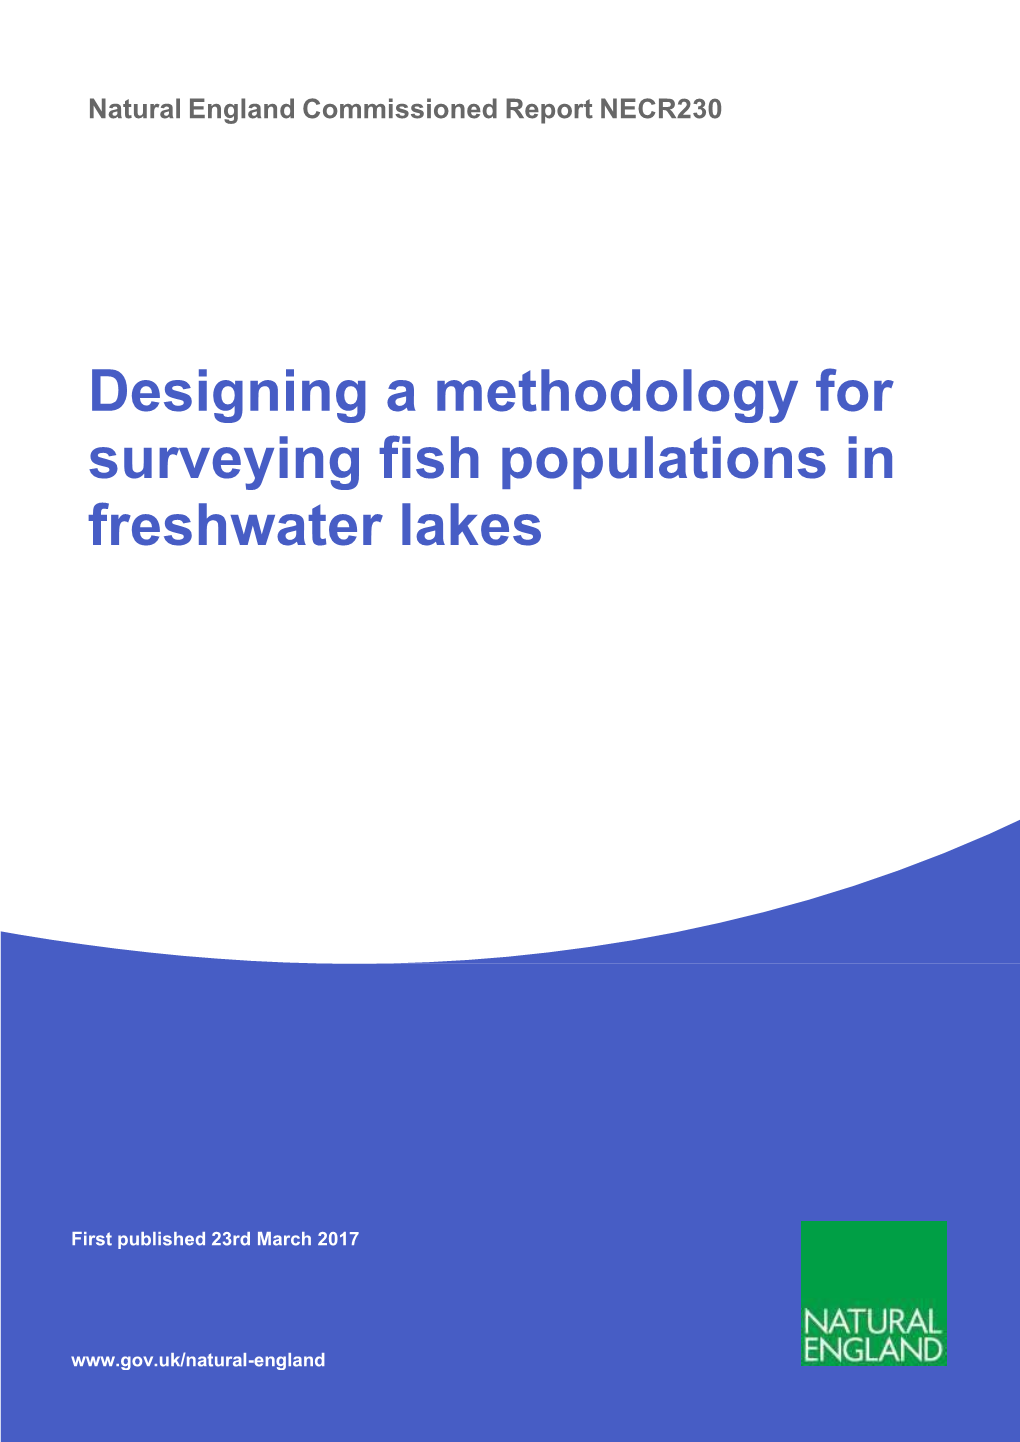 Designing a Methodology for Surveying Fish Populations in Freshwater Lakes